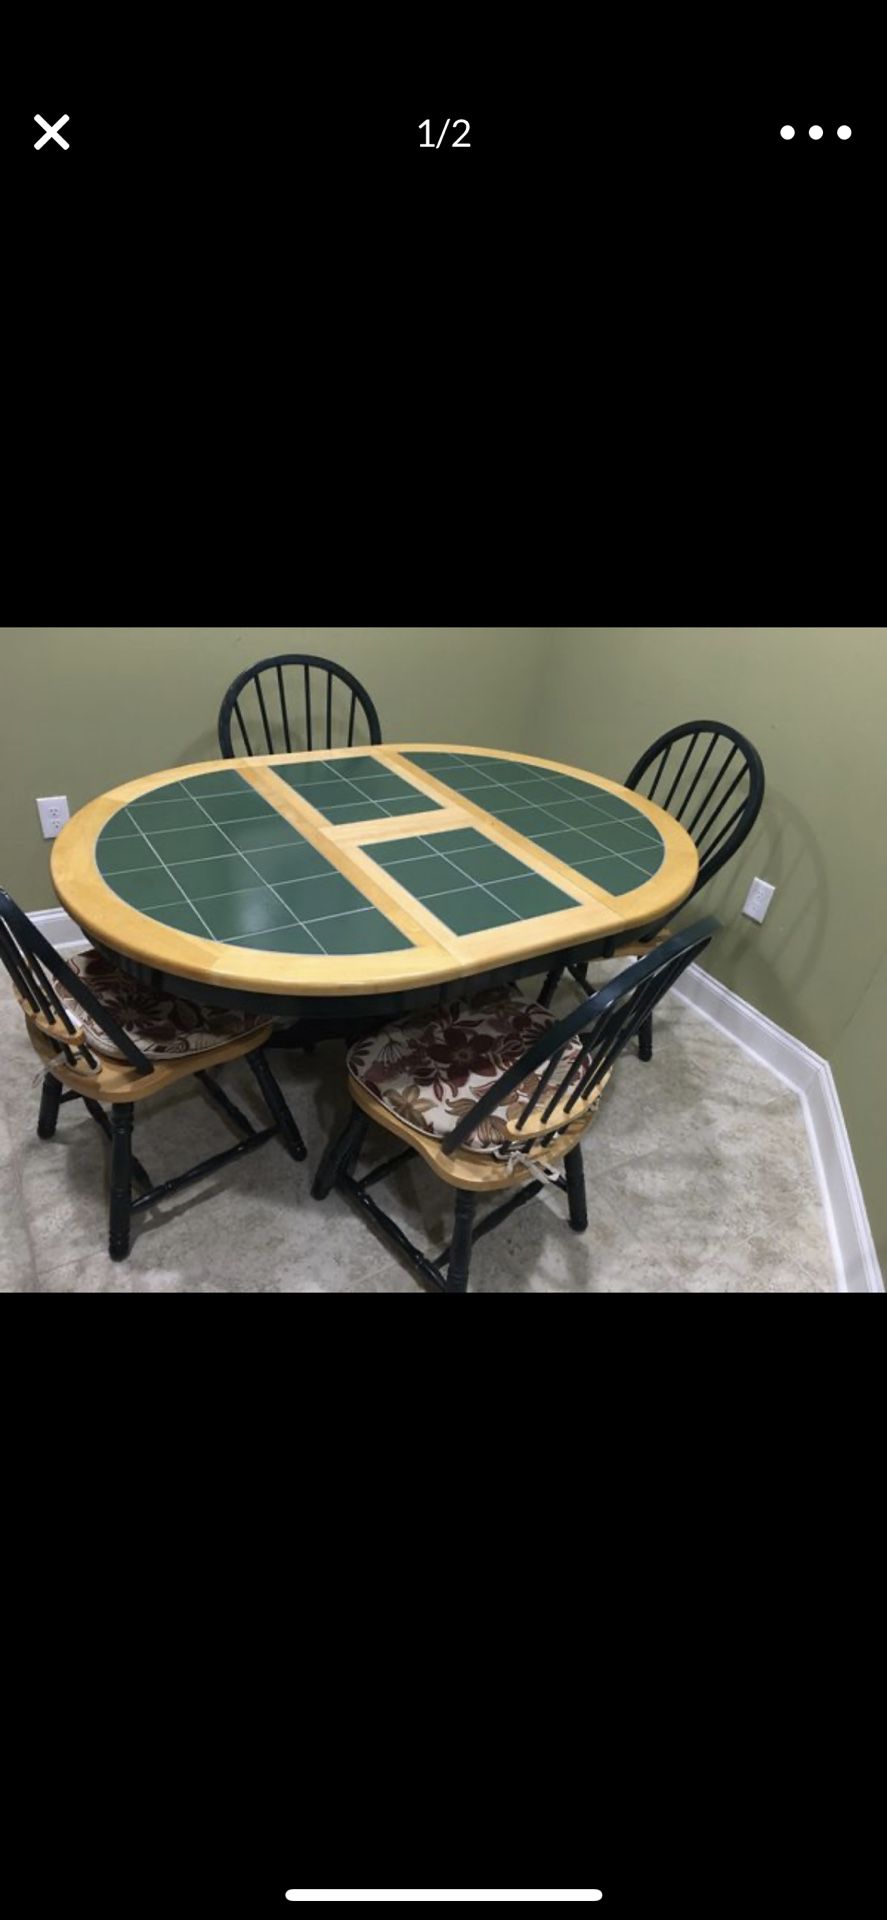 Breakfast table with four chairs, very good condition no damage.